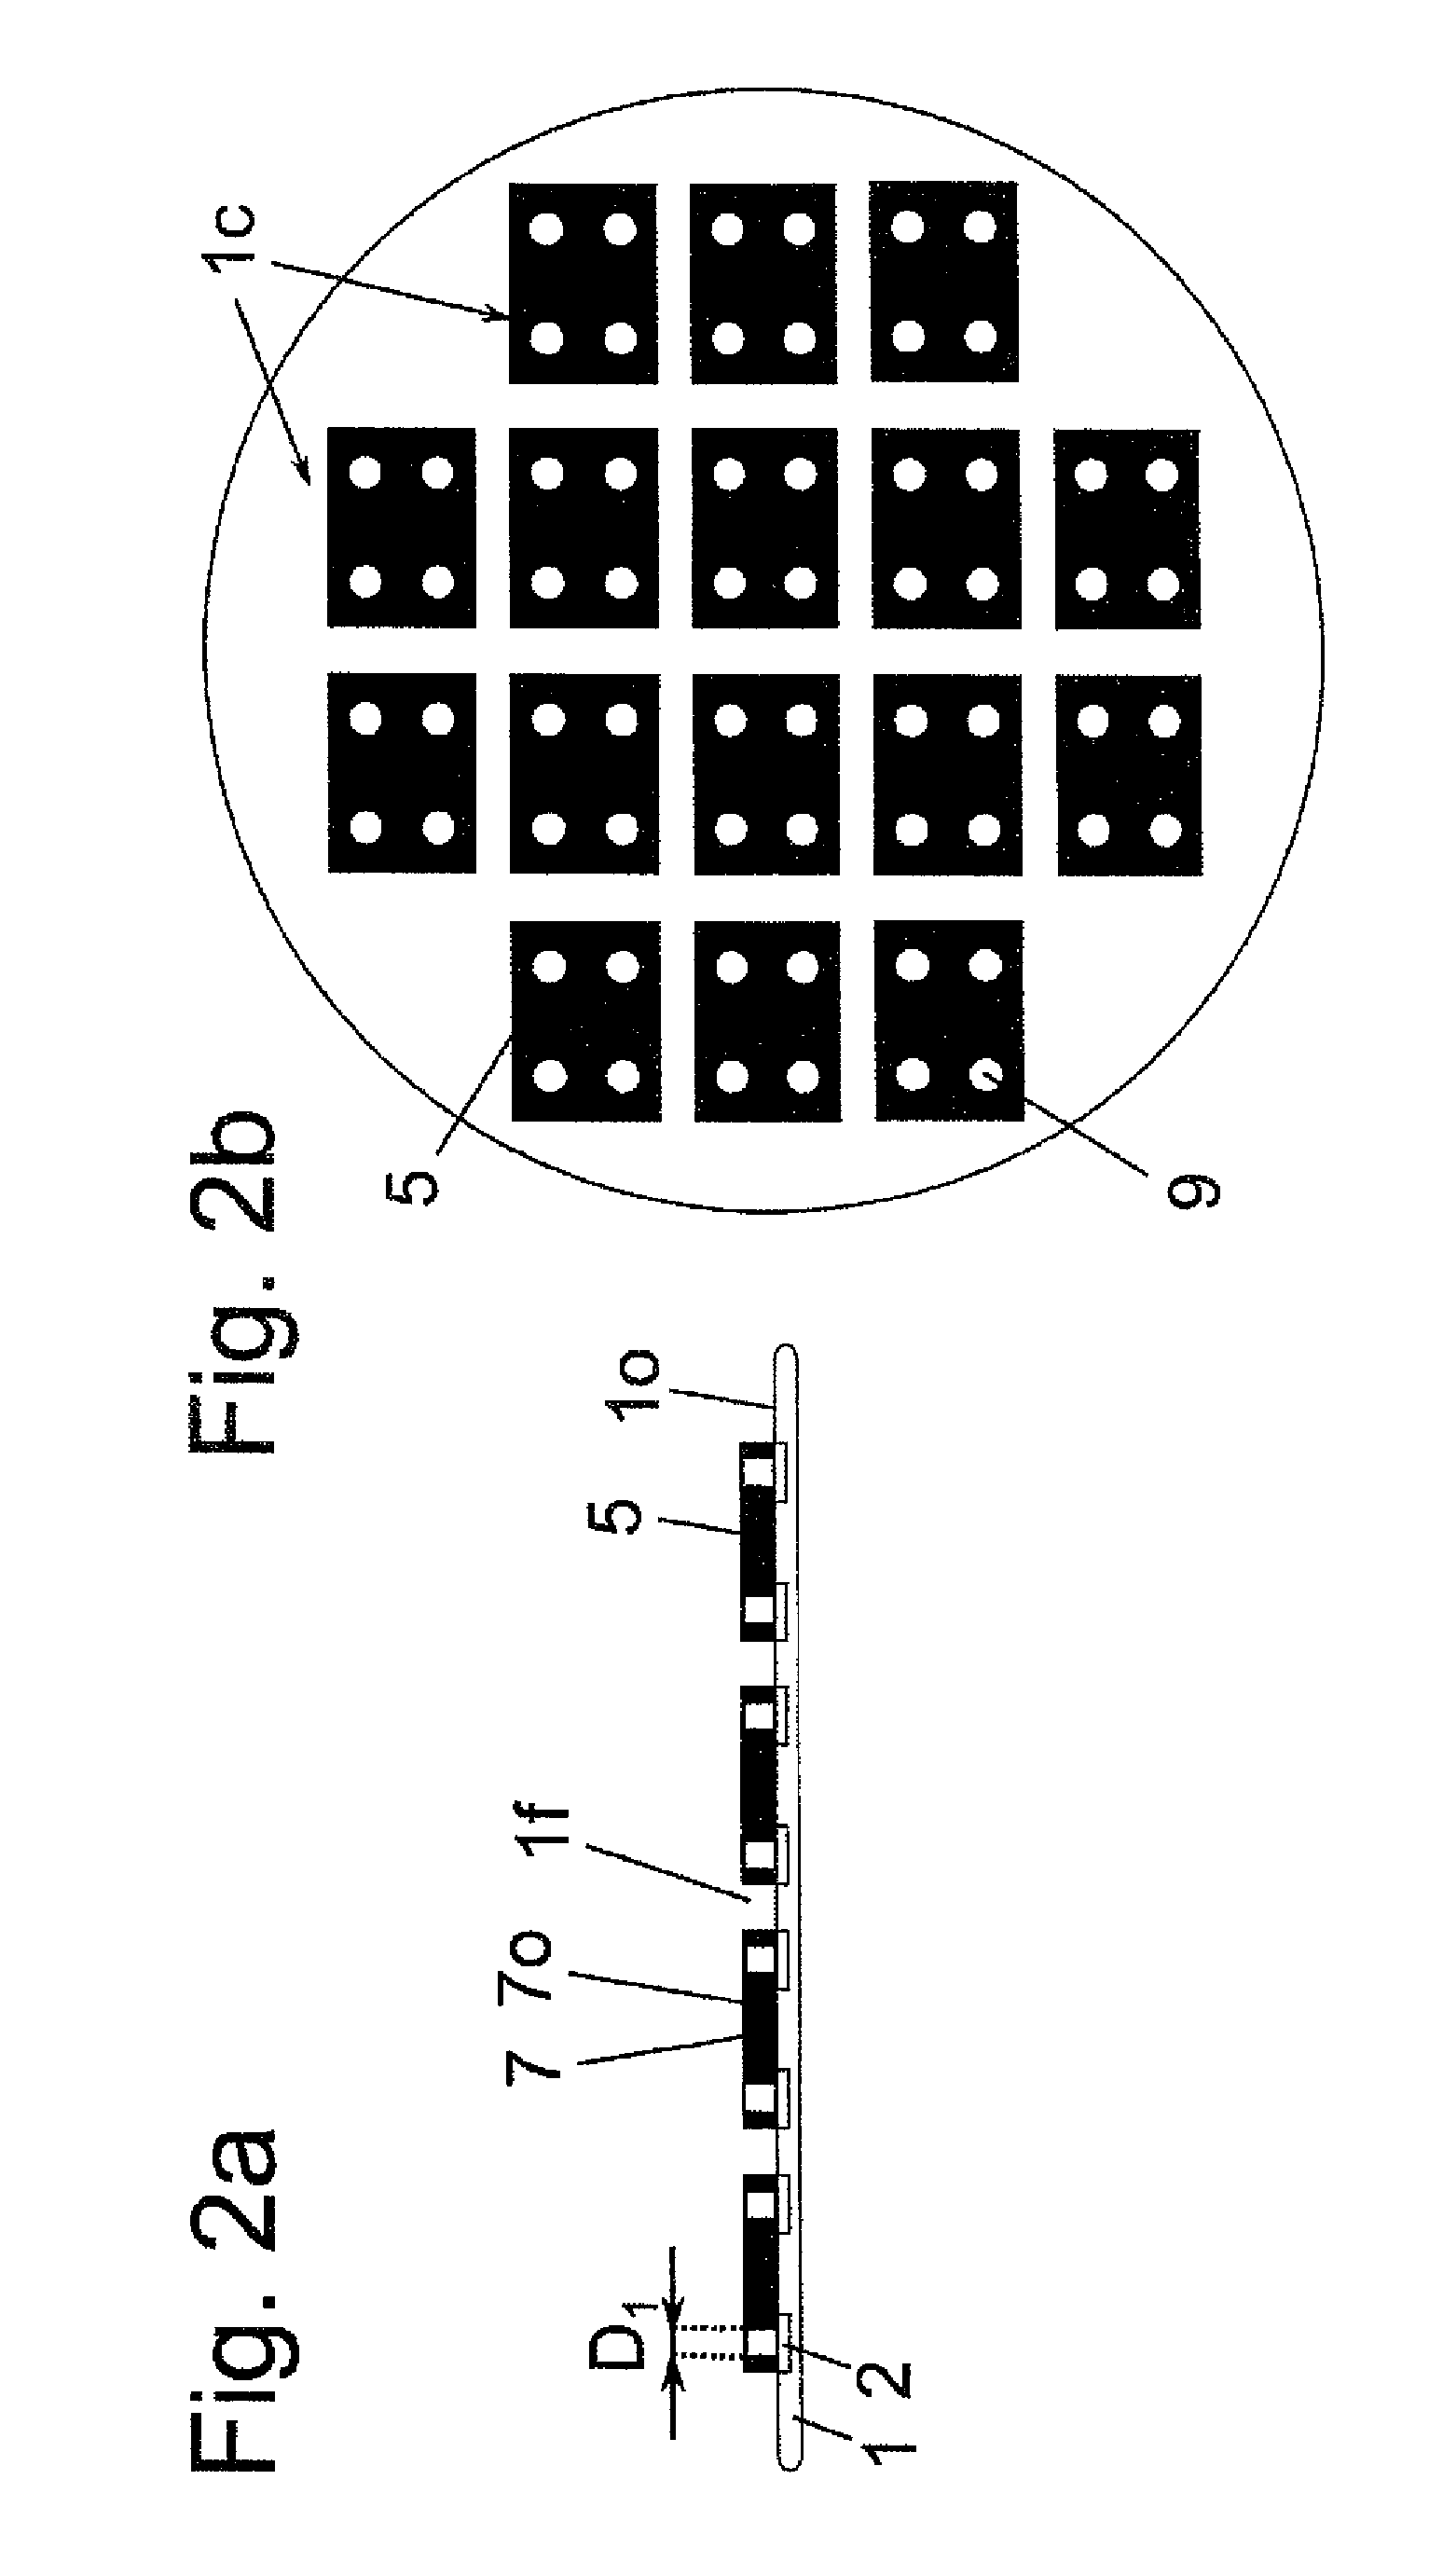 Method for fastening chips with a contact element onto a substrate provided with a functional layer having openings for the chip contact elements